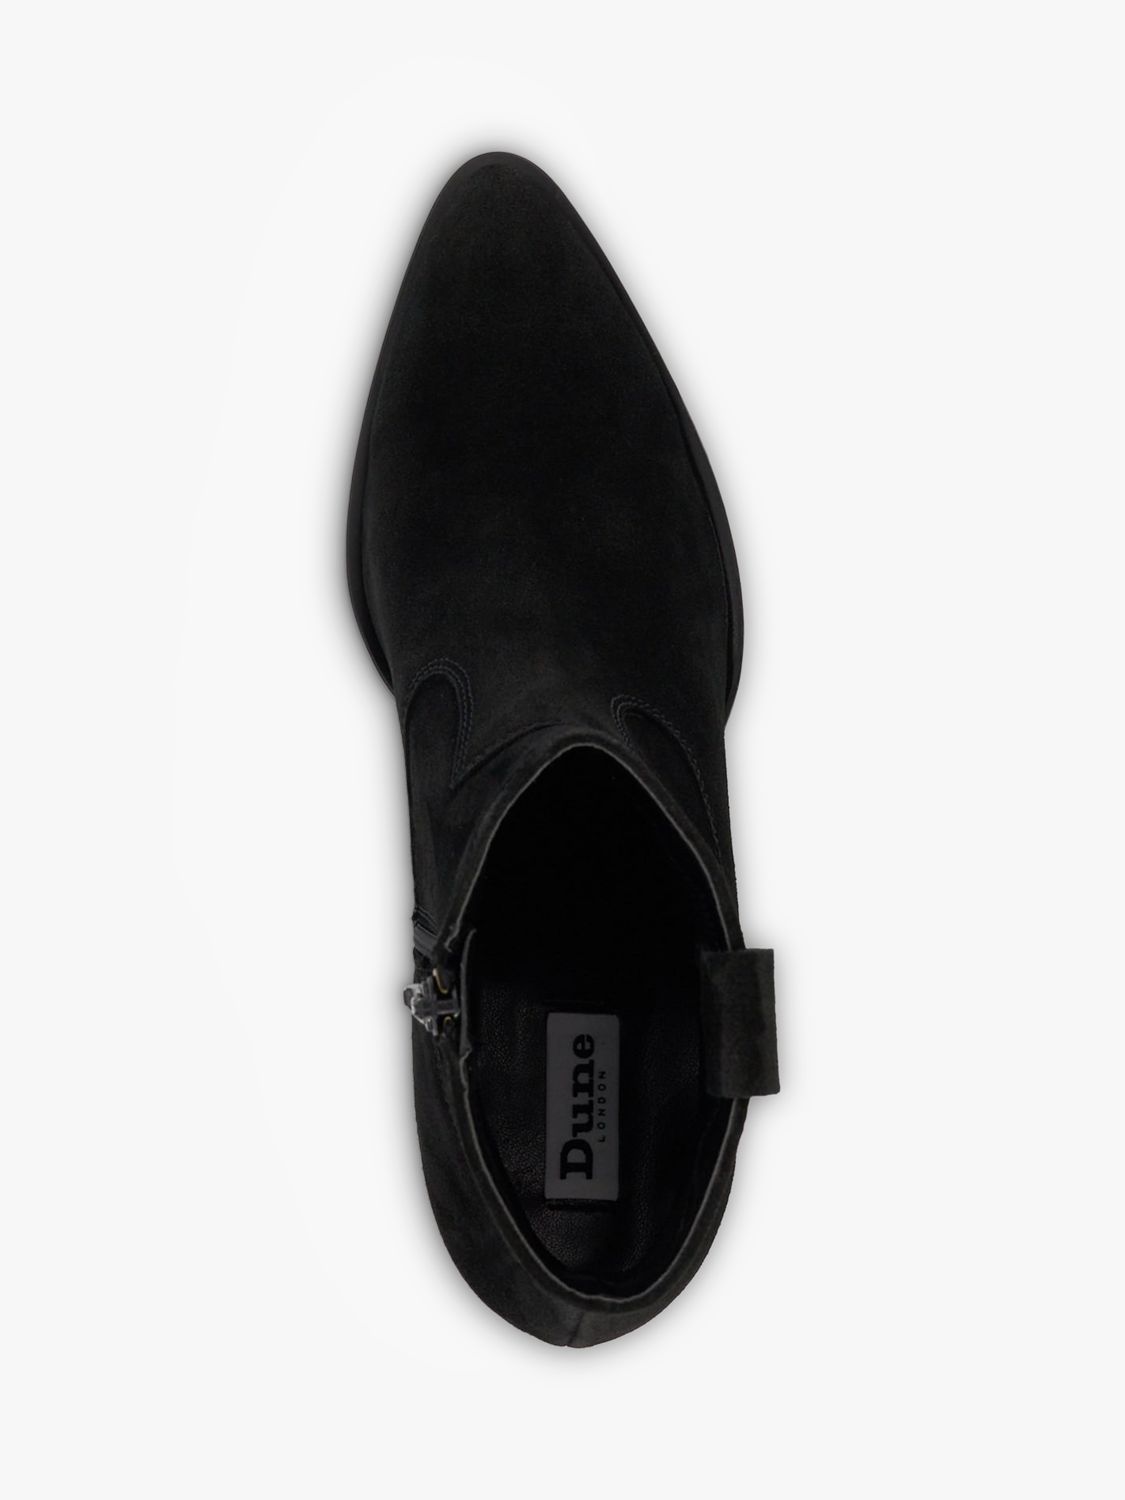 Dune Possible Suede Cowboy Boots, Black at John & Partners